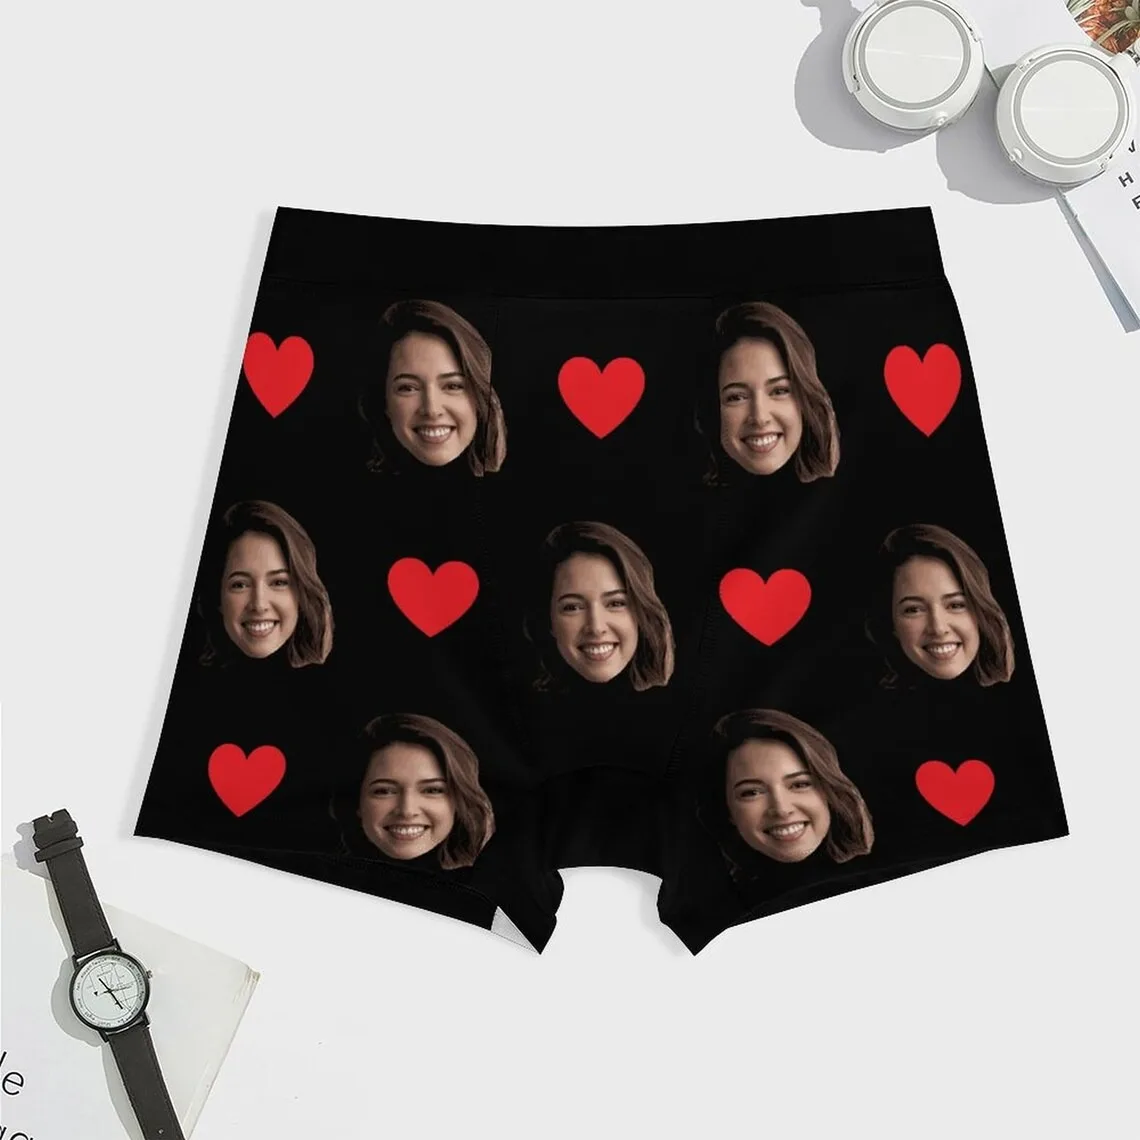 Custom Boxers Men Women Personalised Boxers With Face On Underwear Heart Socks Valentine's Day Gifts For Boyfriend/Husband